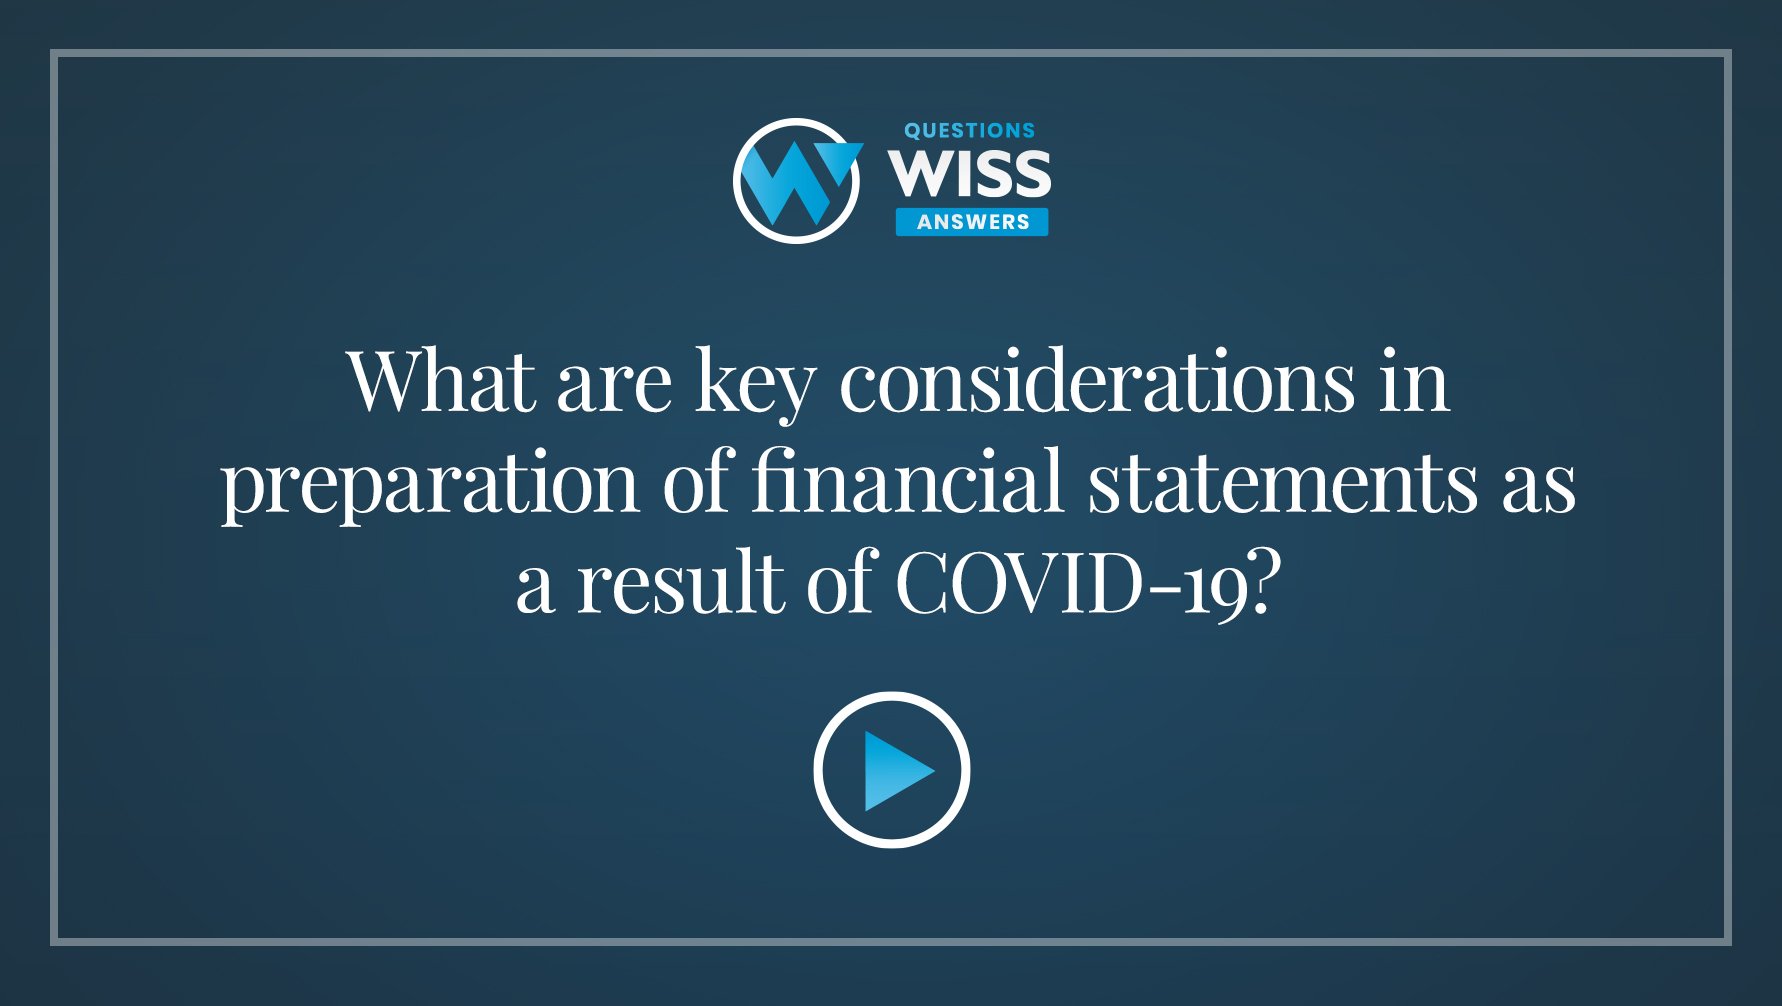 What are key considerations in preparation of financial statements as a result of COVID-19?